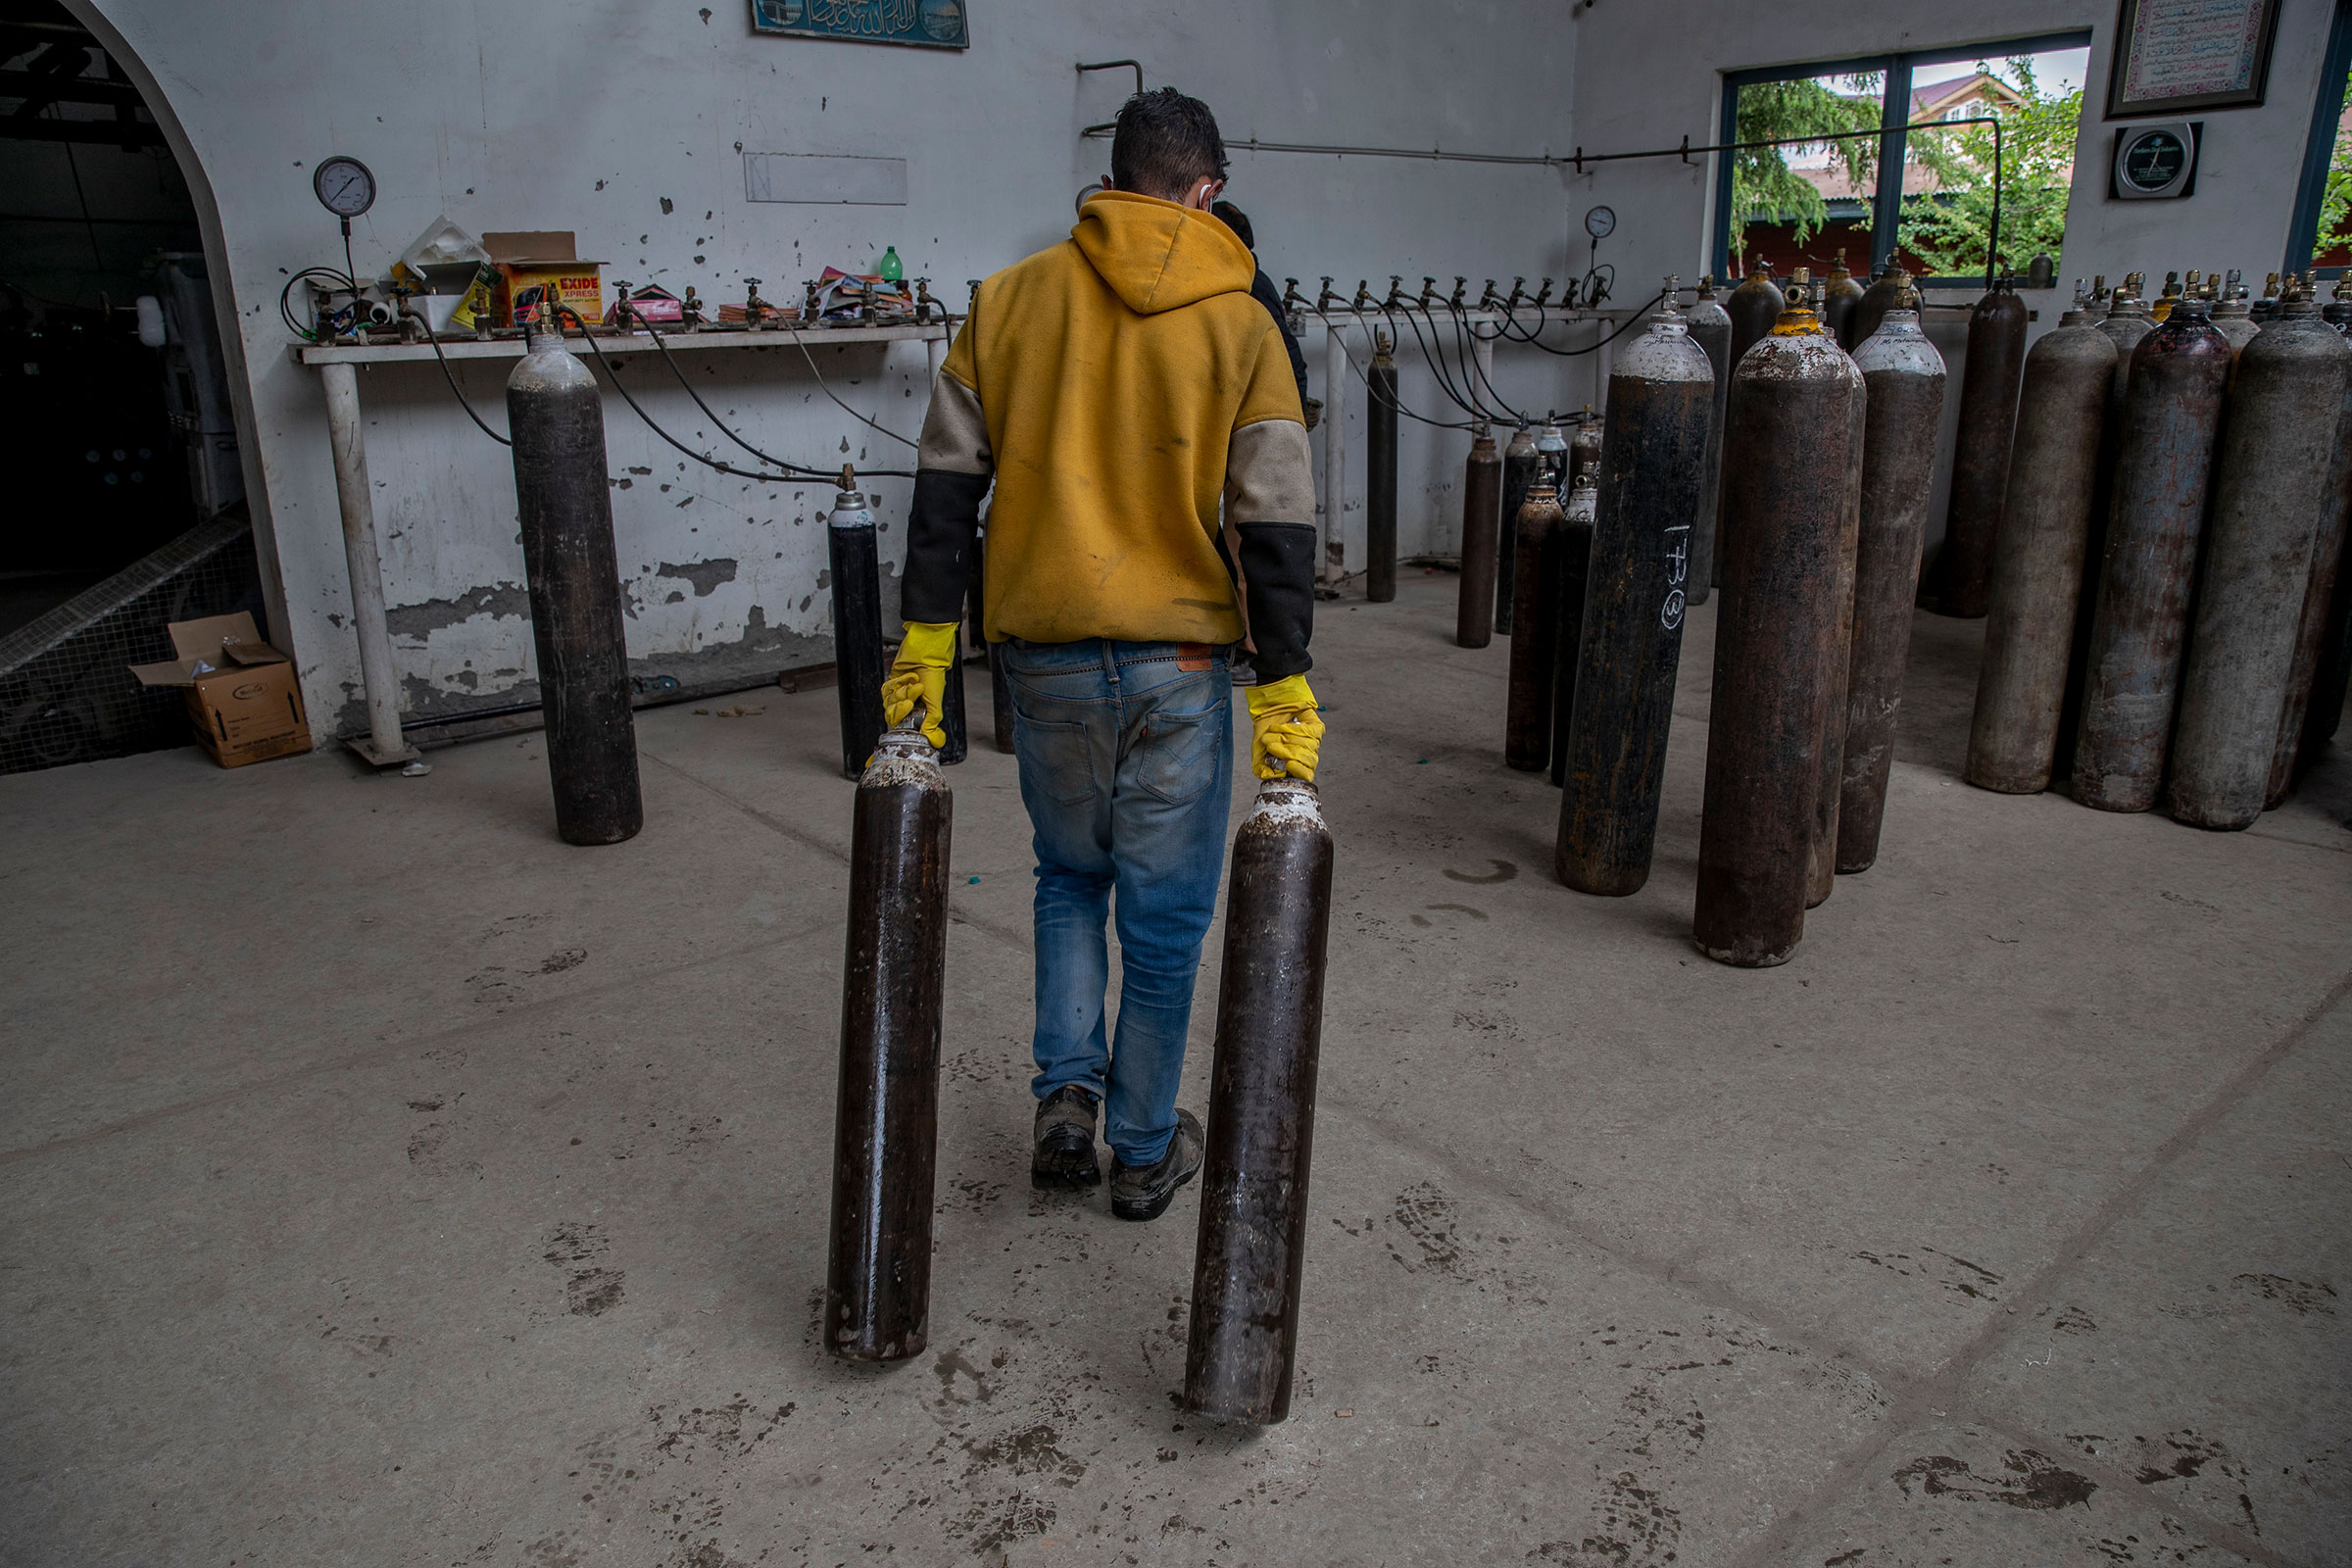 A worker moves empty oxygen cylinders for refilling at a gas supplier facility in Srinagar on May 11, 2021. (Dar Yasin—AP)